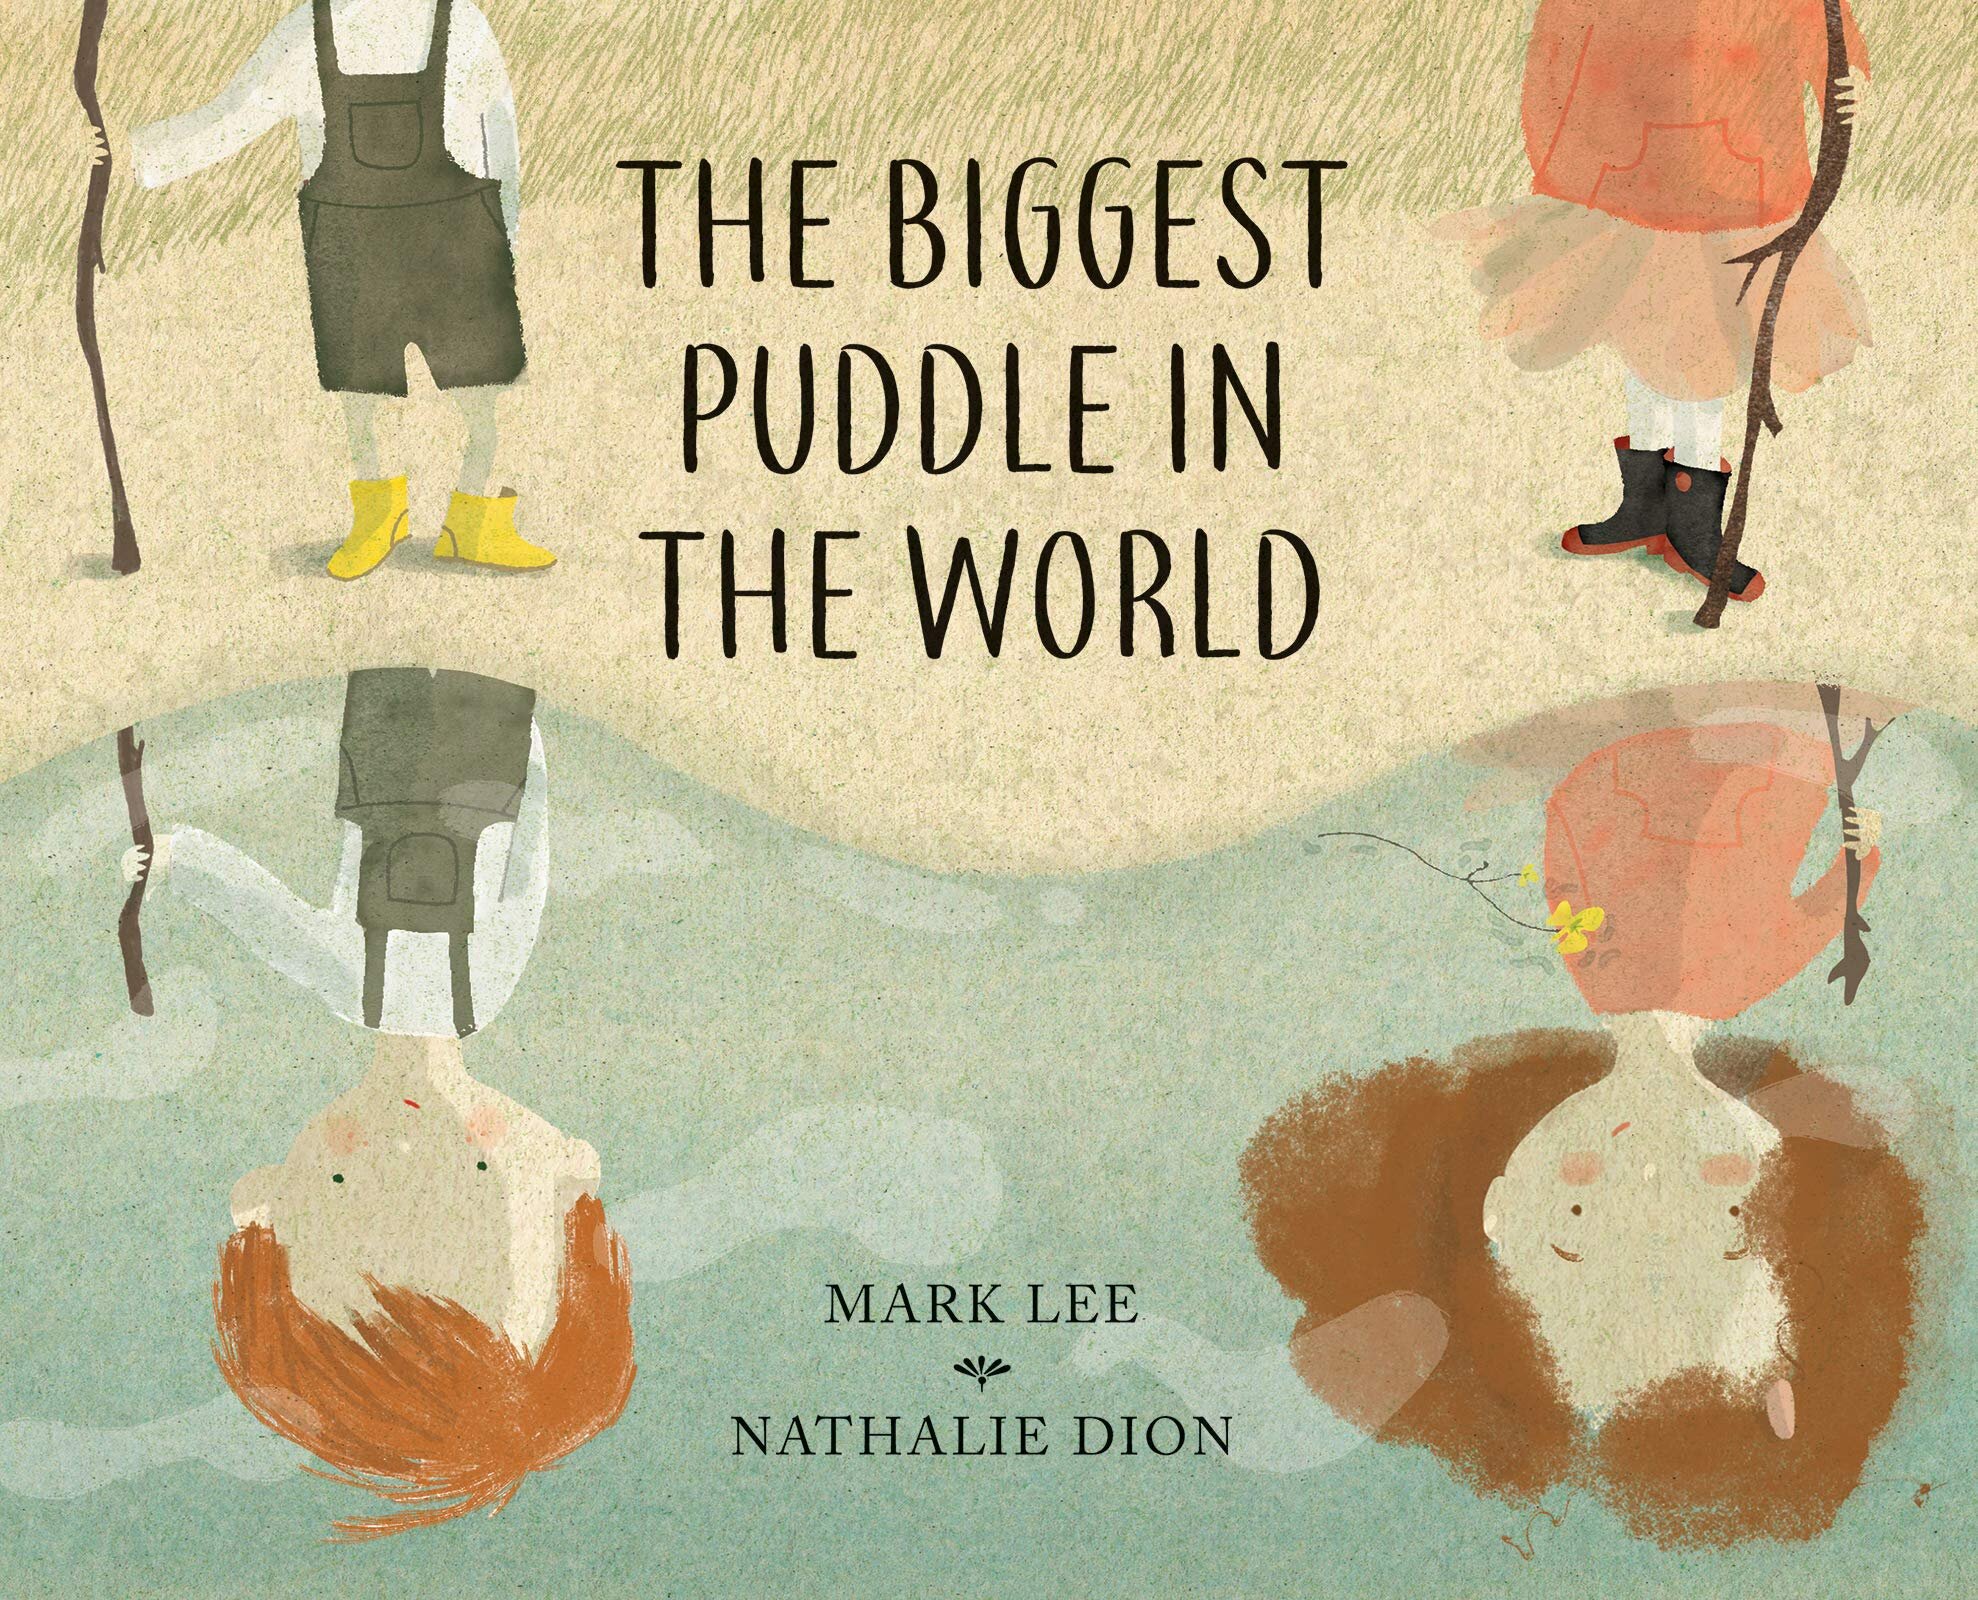 The Biggest Puddle in the World – Mark Lee